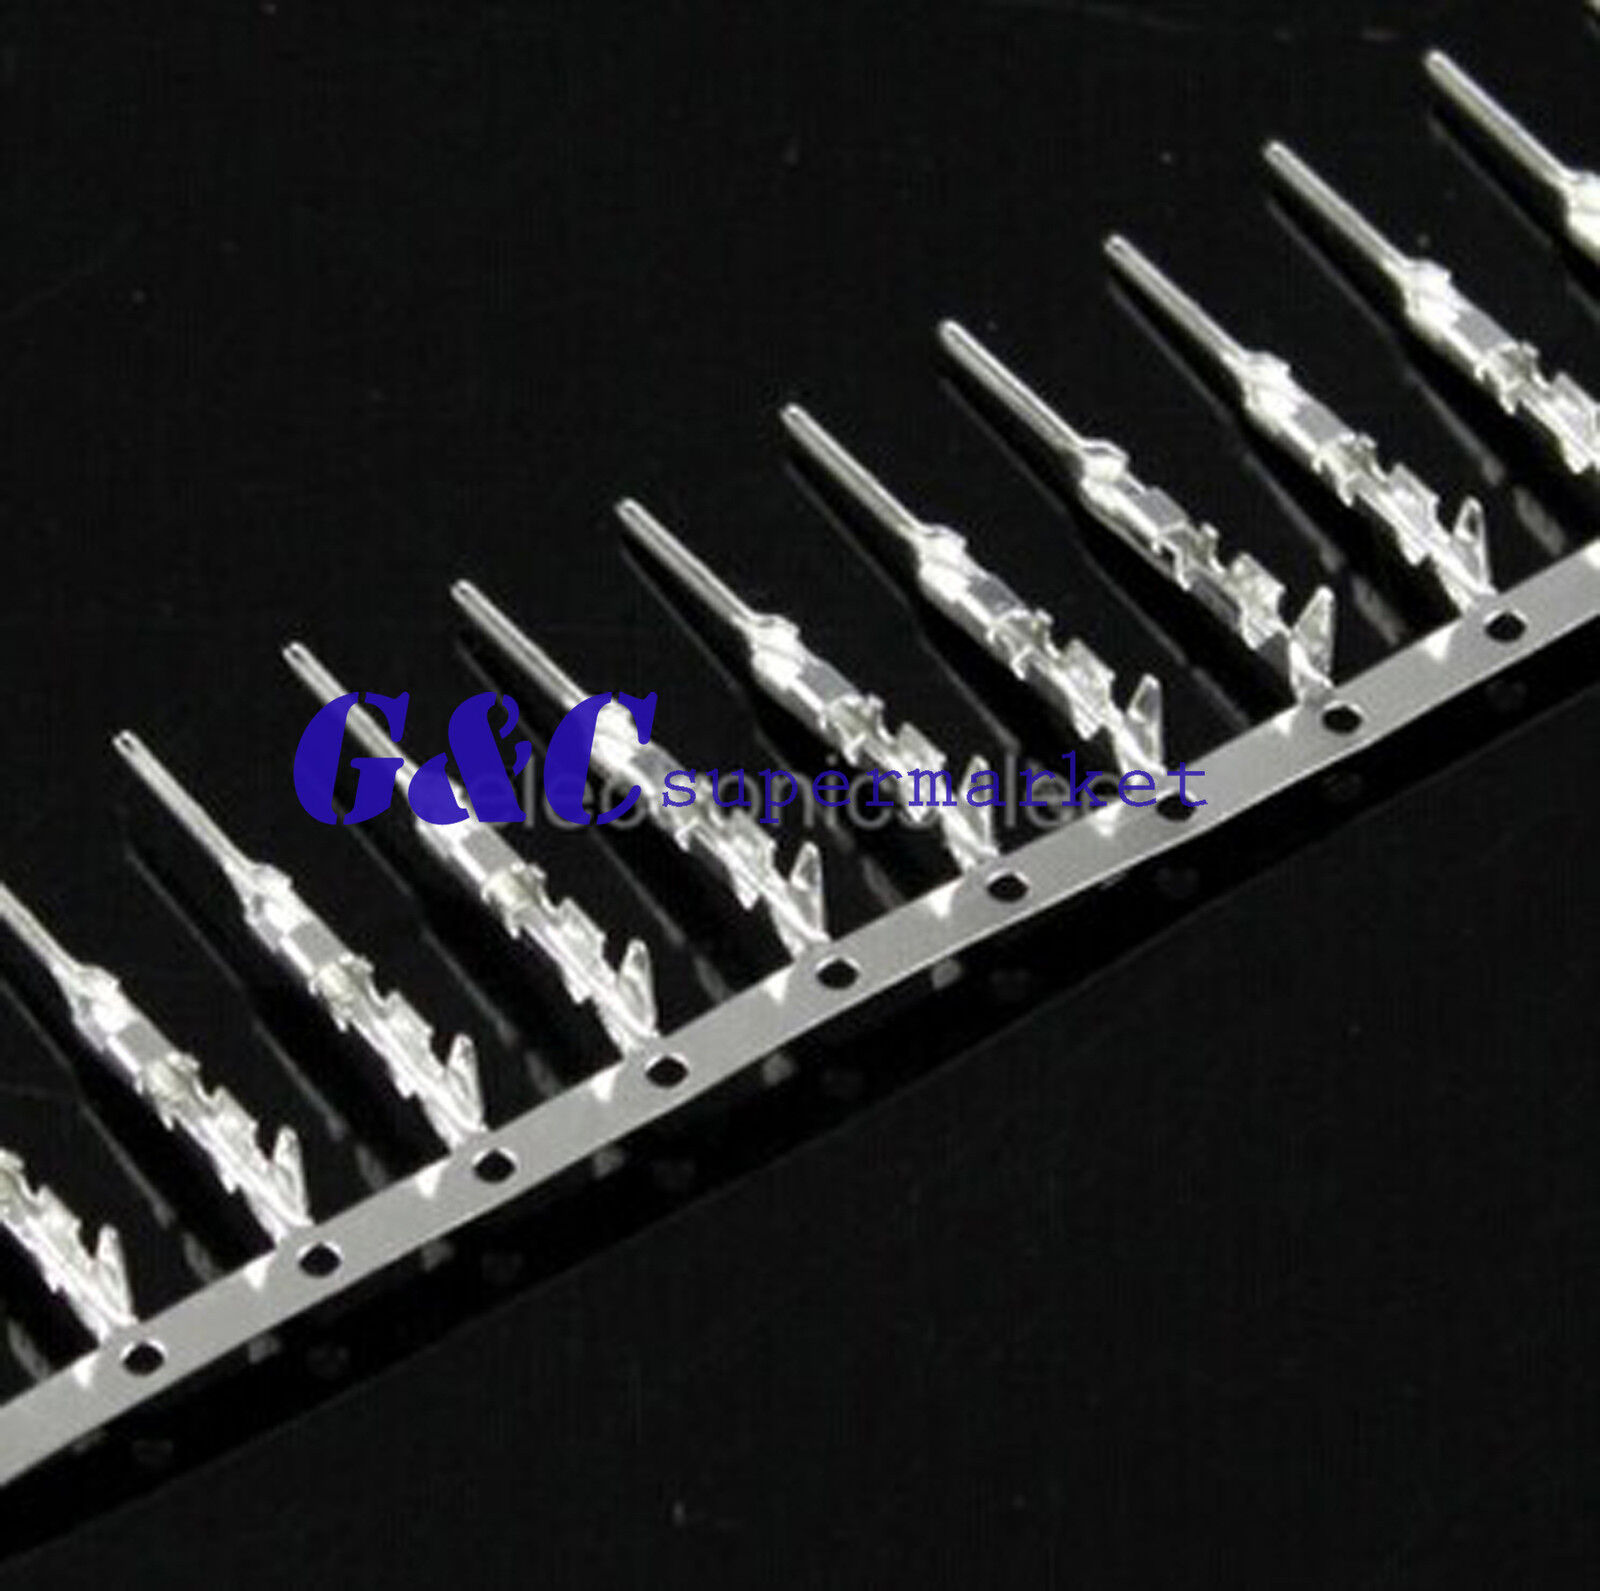 100Pcs Male Pin Connector for Dupont 2.54mm Wire Max 57% OFF Jumper Pi Very popular Cable